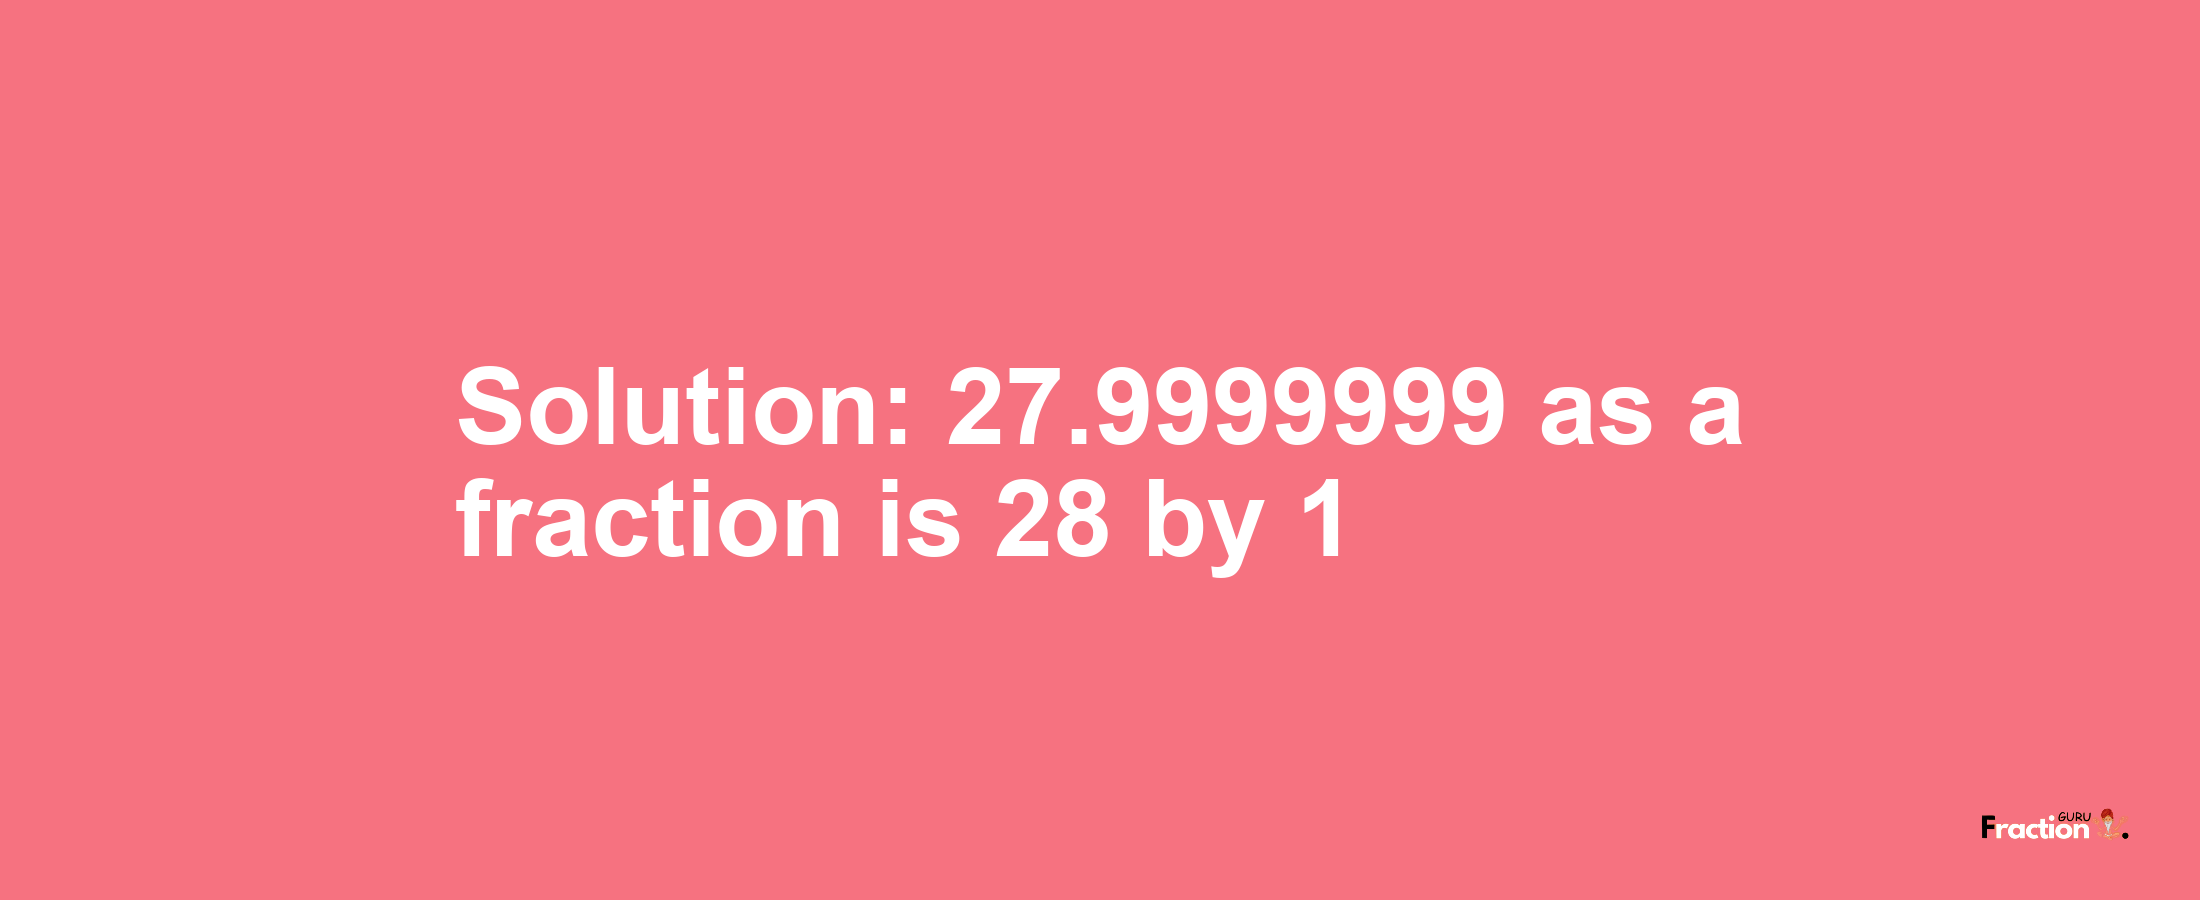 Solution:27.9999999 as a fraction is 28/1